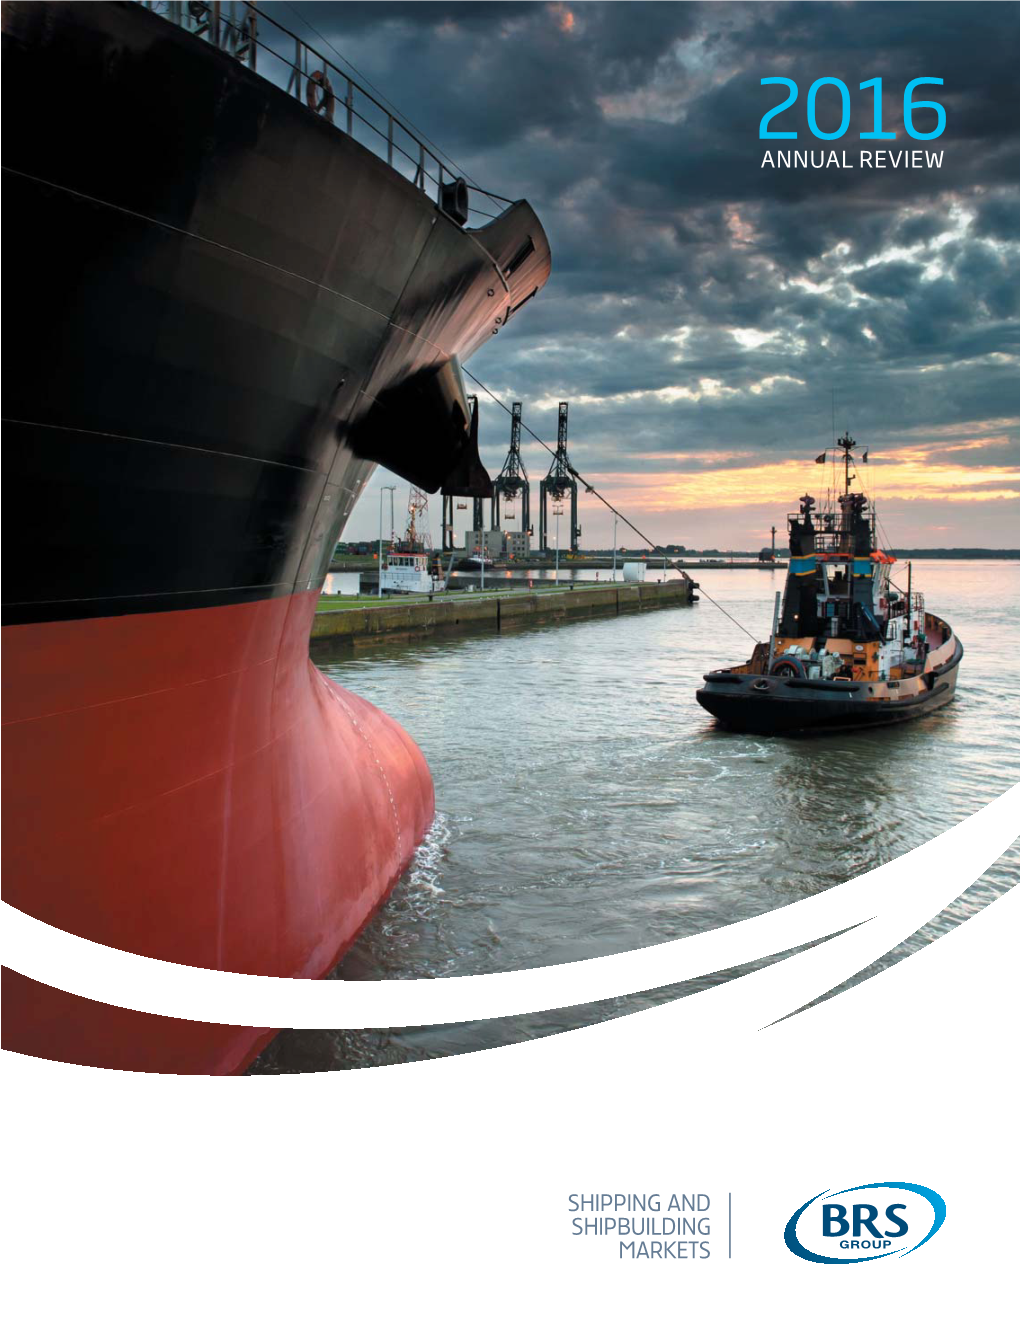 SHIPPING and SHIPBUILDING MARKETS Contents